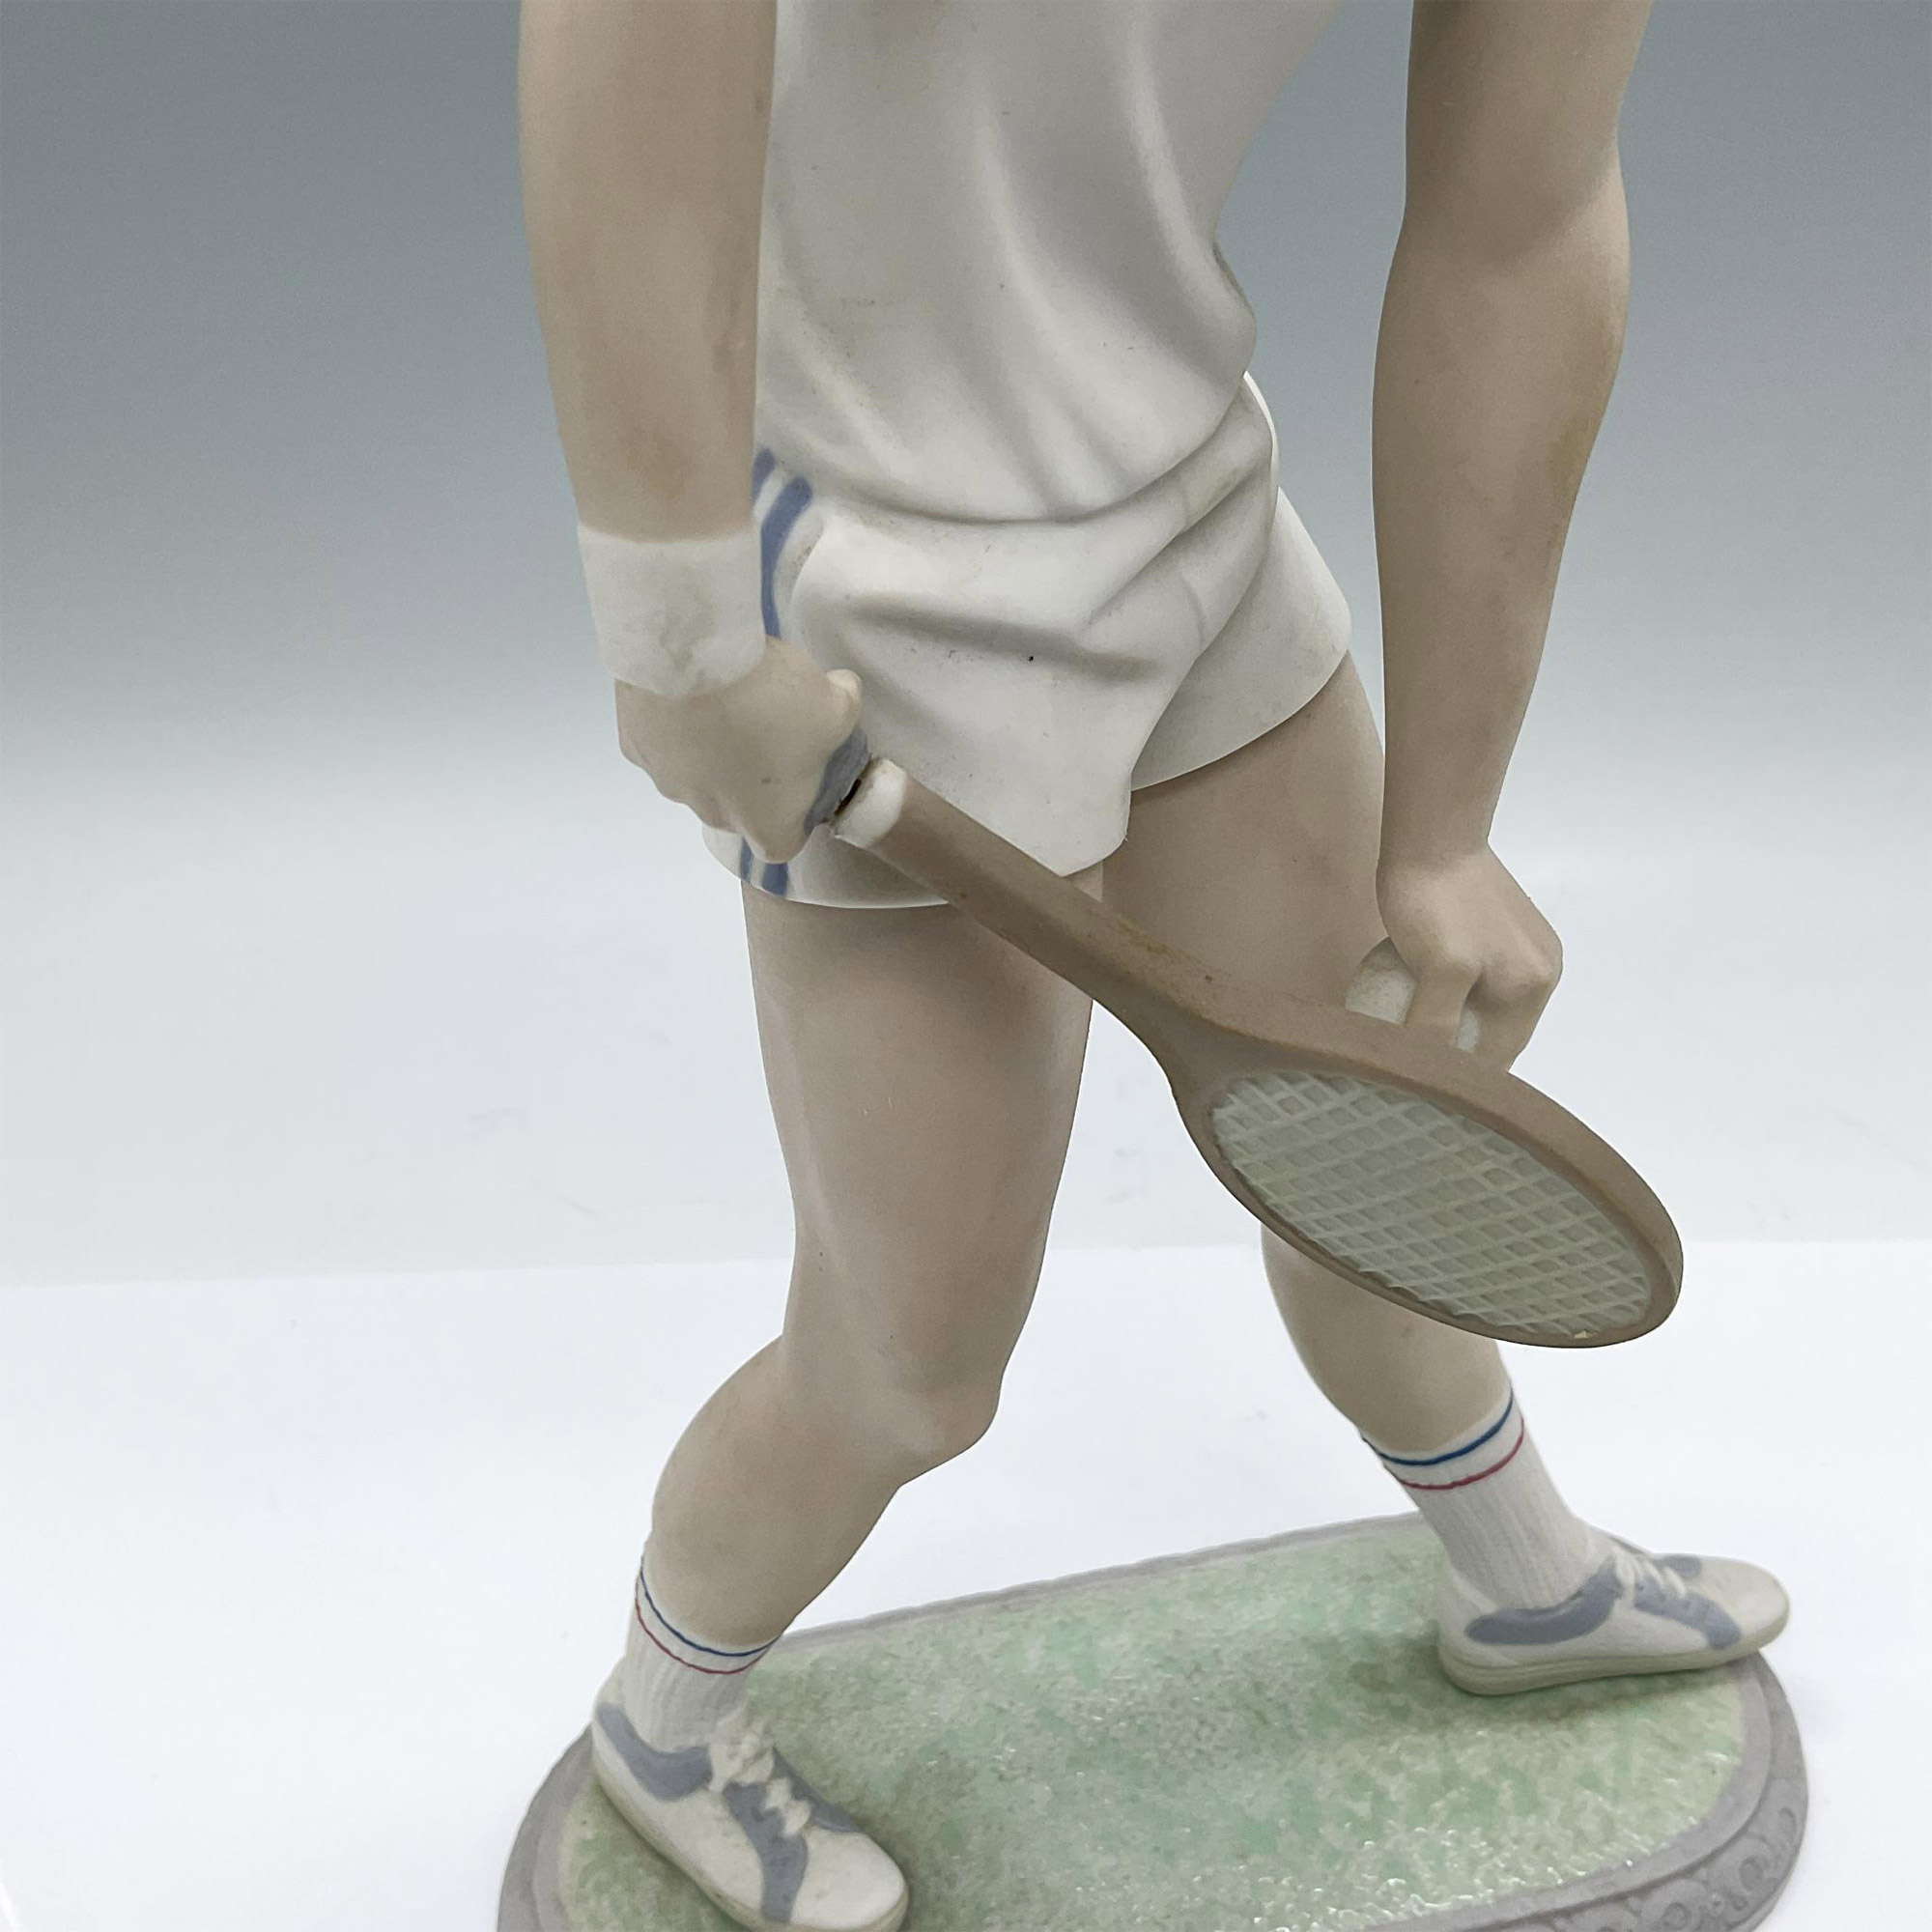 Male Tennis Player 1011426 - Lladro Porcelain Figurine - Image 3 of 4